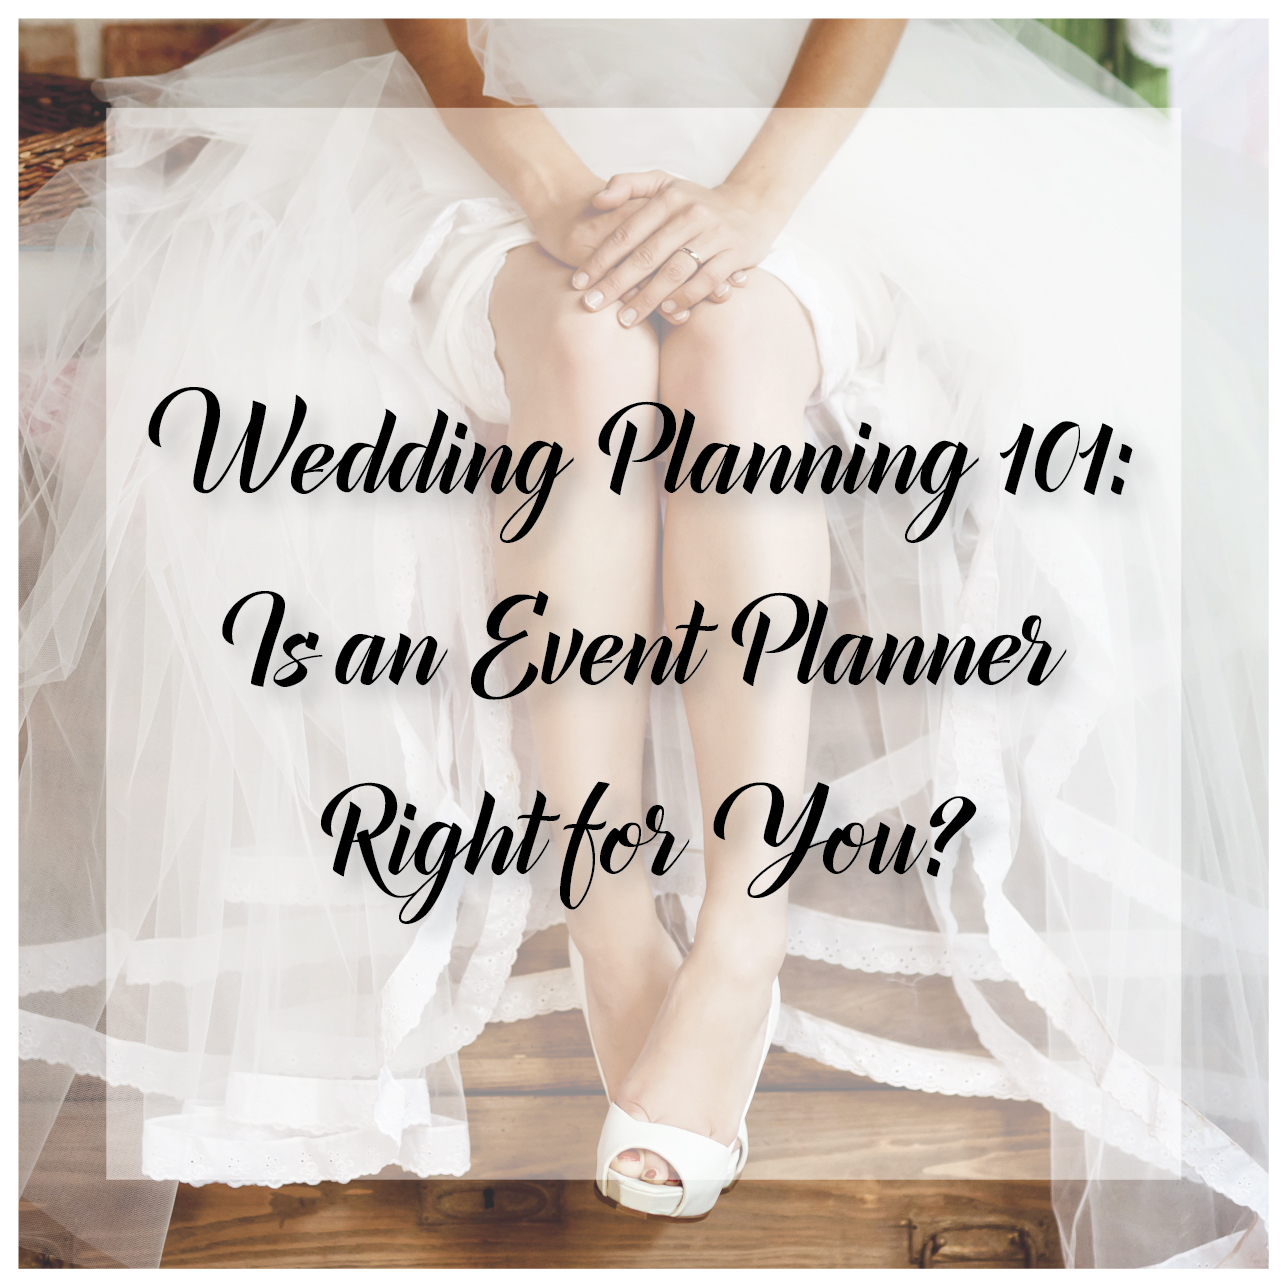 Is an Event Planner Right for You?